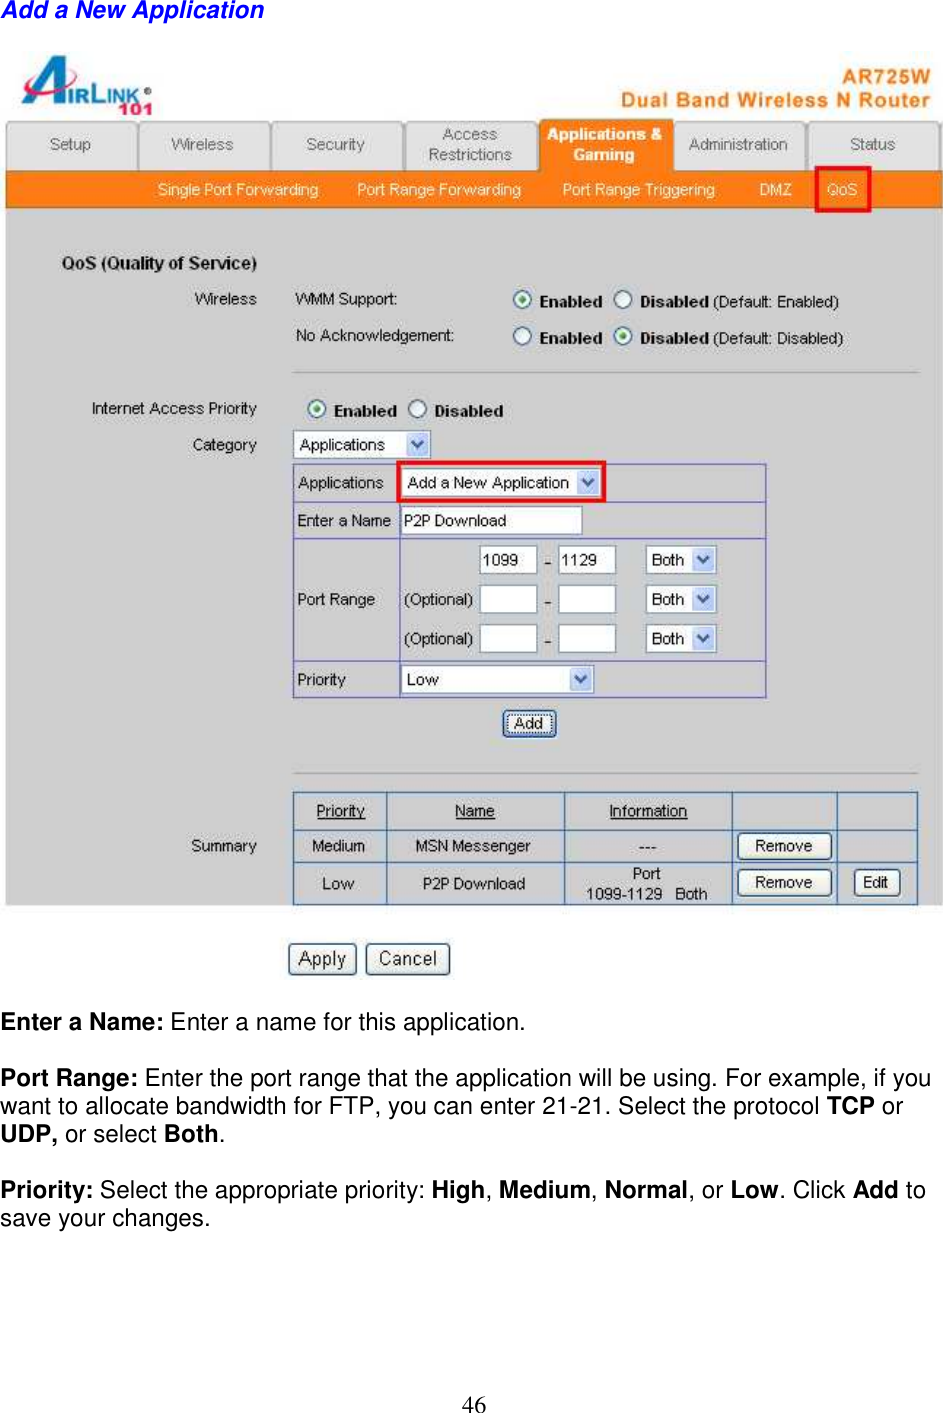 46 Add a New Application    Enter a Name: Enter a name for this application.  Port Range: Enter the port range that the application will be using. For example, if you want to allocate bandwidth for FTP, you can enter 21-21. Select the protocol TCP or UDP, or select Both.  Priority: Select the appropriate priority: High, Medium, Normal, or Low. Click Add to save your changes.       